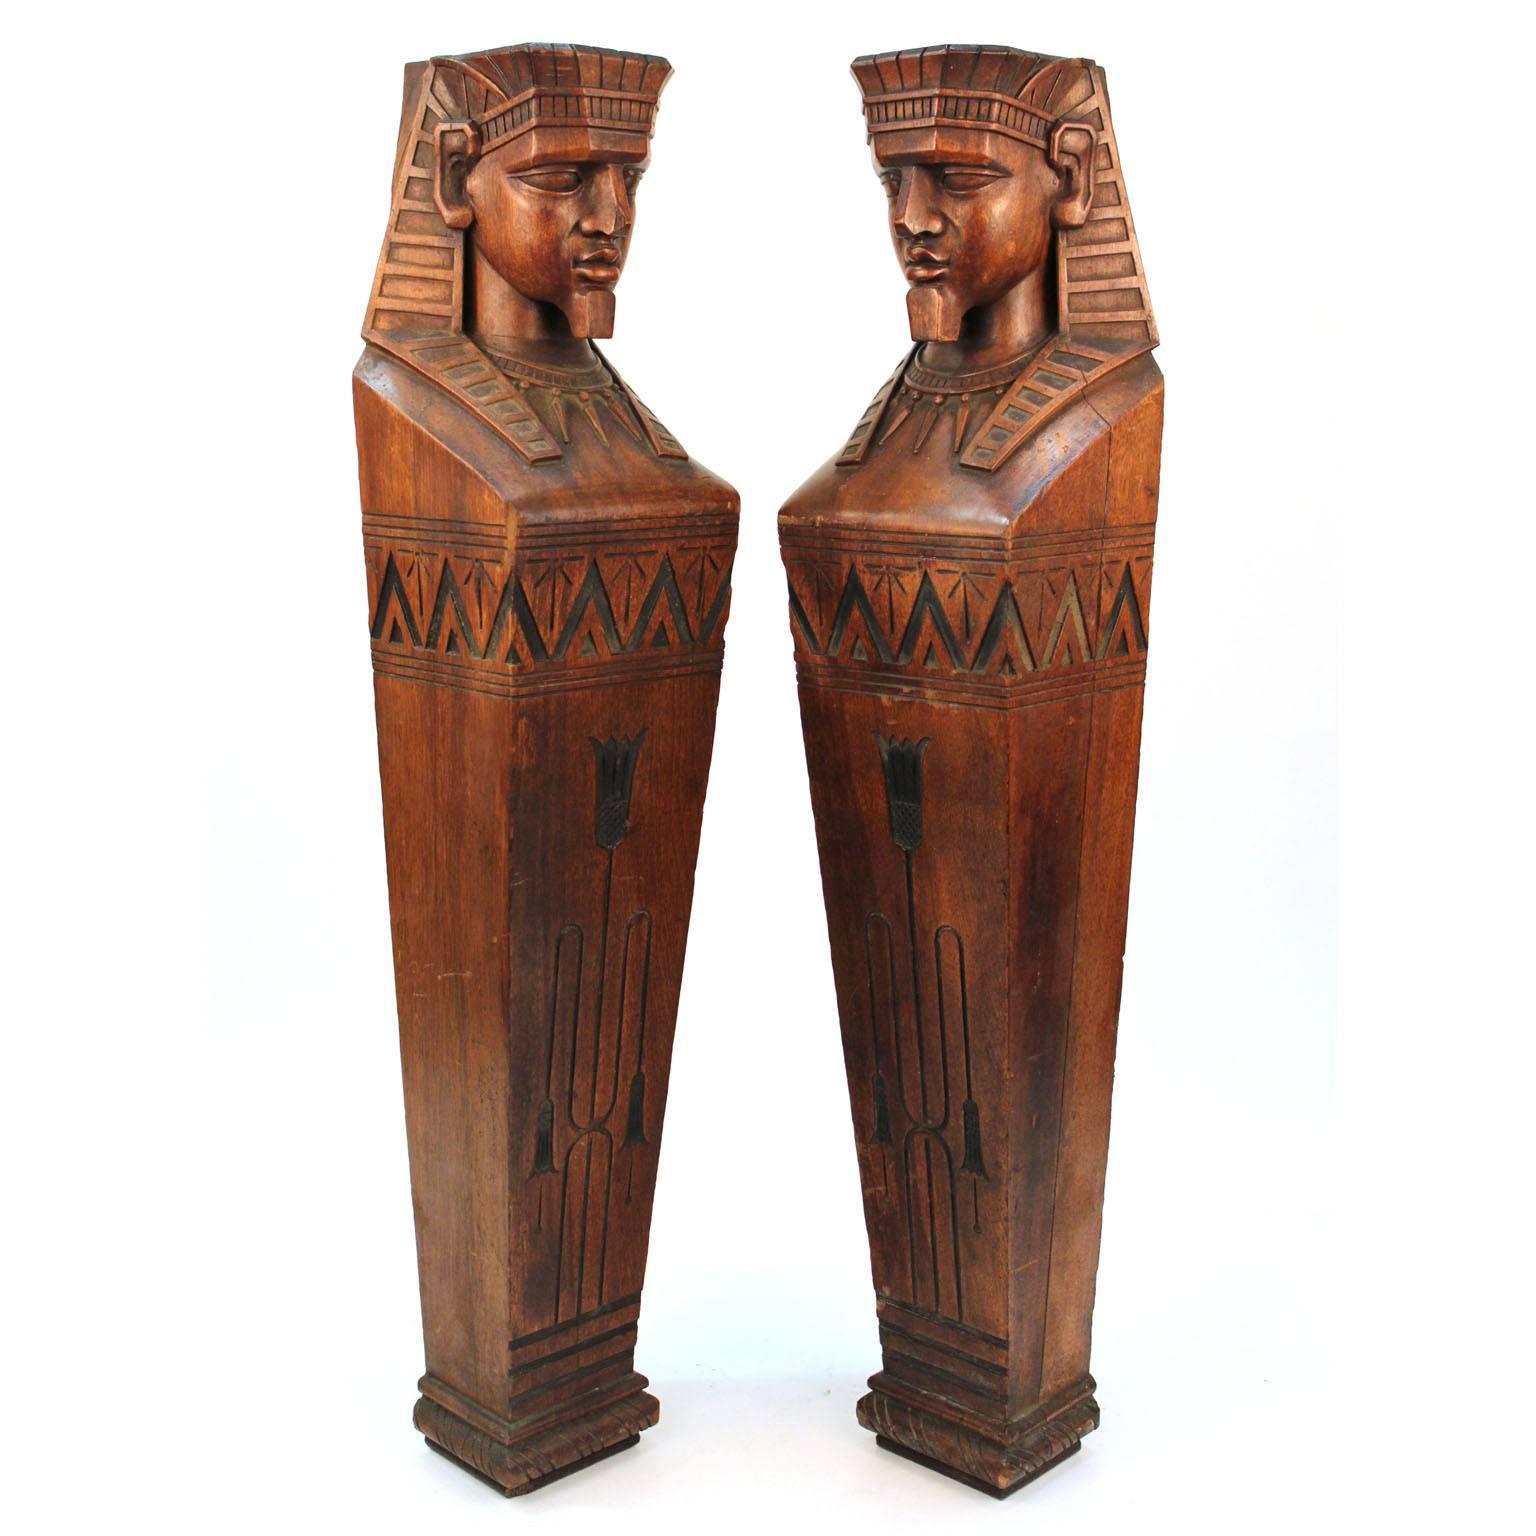 A pair of Egyptian Revival caryatids in carved wood with pharaonic attributes. Possibly originally part of a mantel or furniture piece. Good original condition; slight chip to one nose. Unmarked.